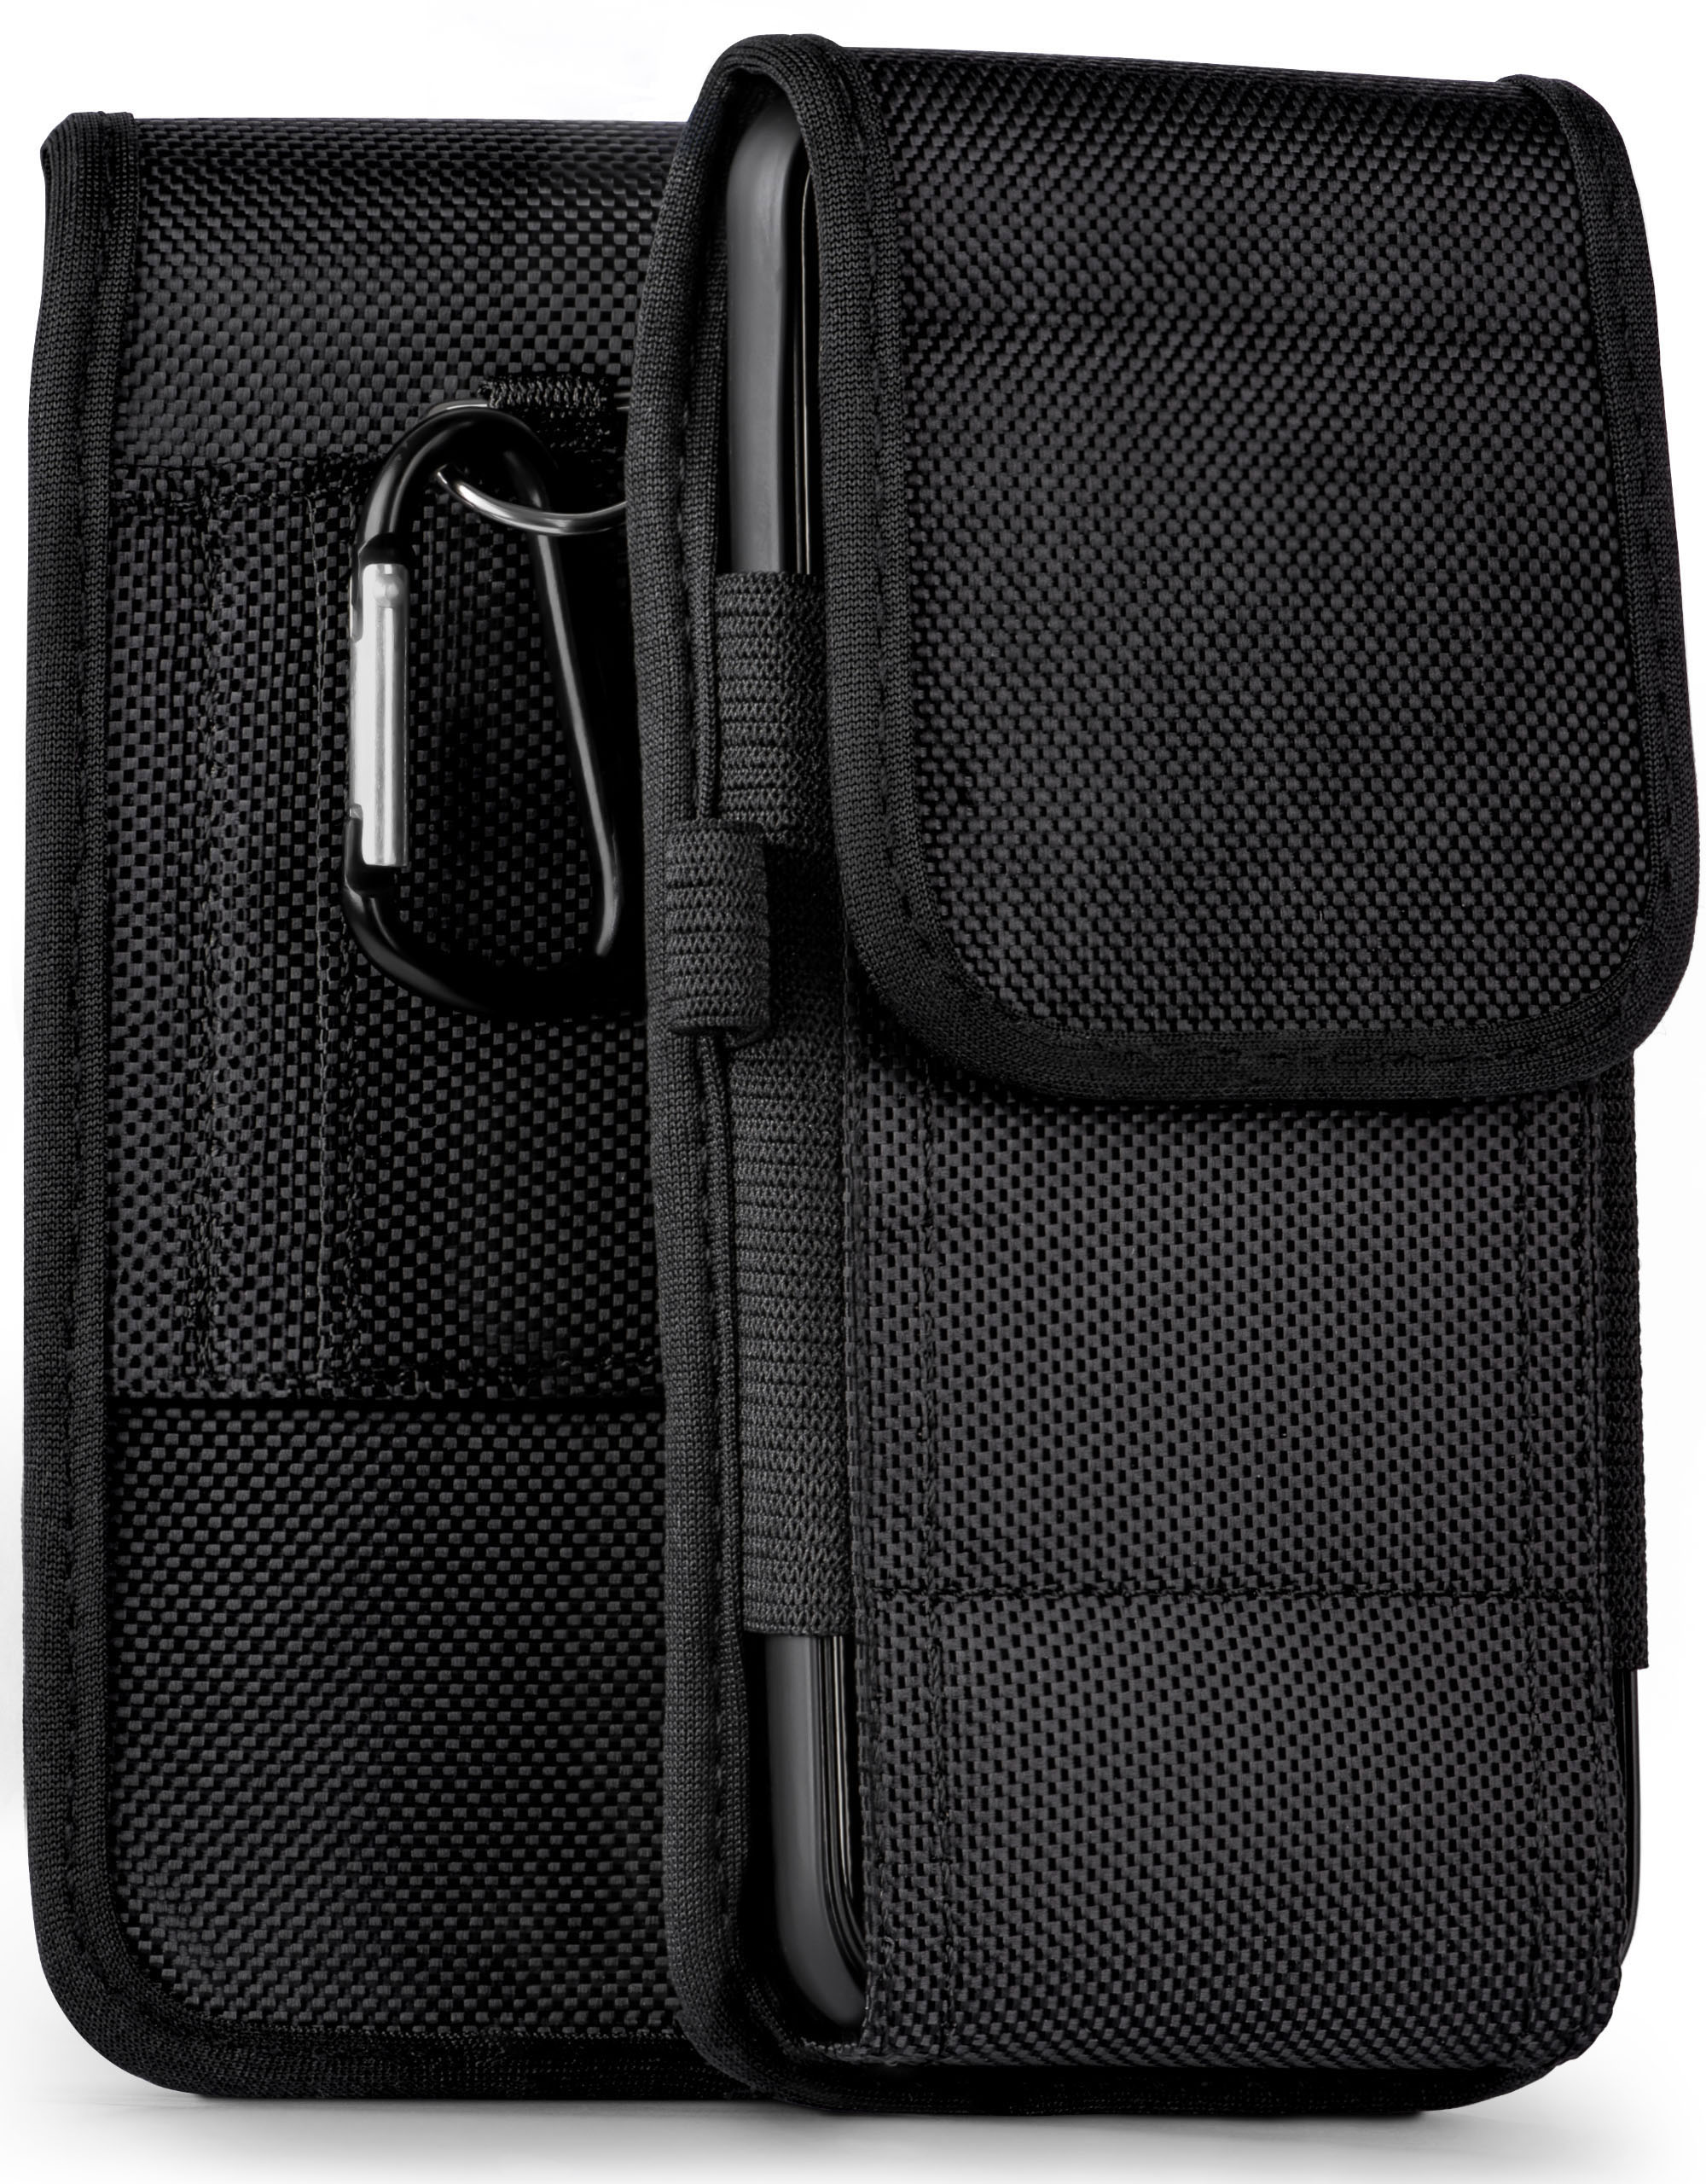 MOEX Case, Trail Huawei, Holster, P9, Agility